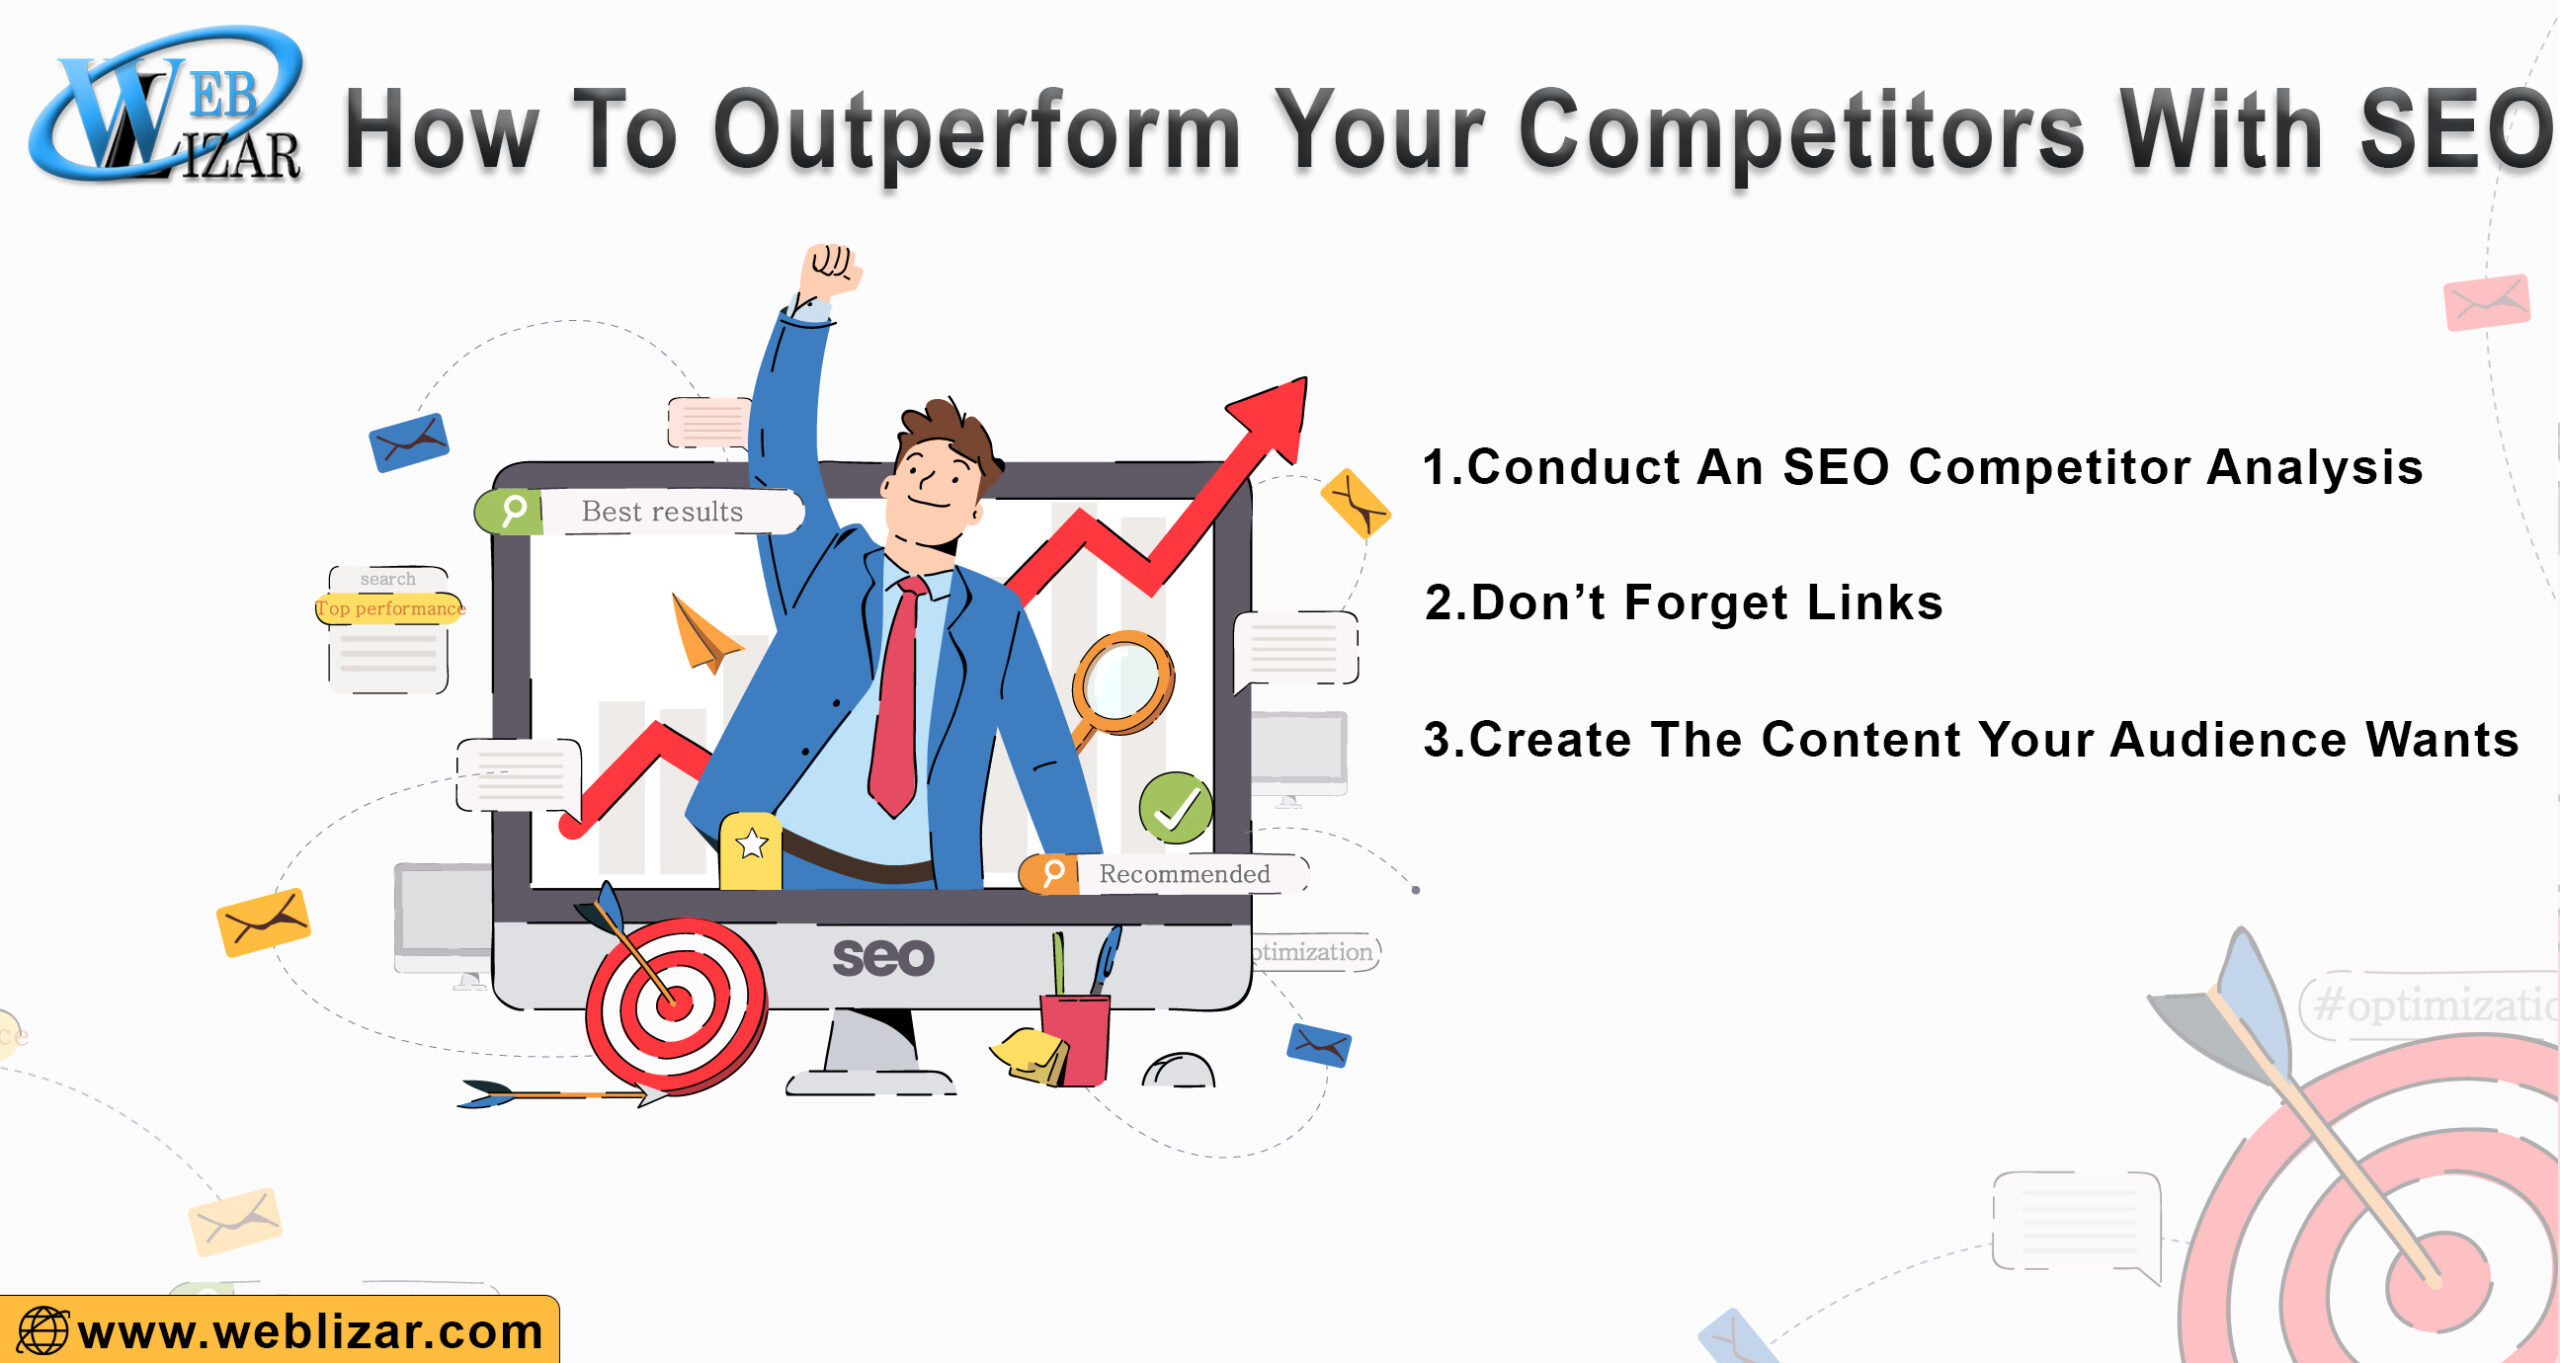 How To Outperform Your Competitors With SEO